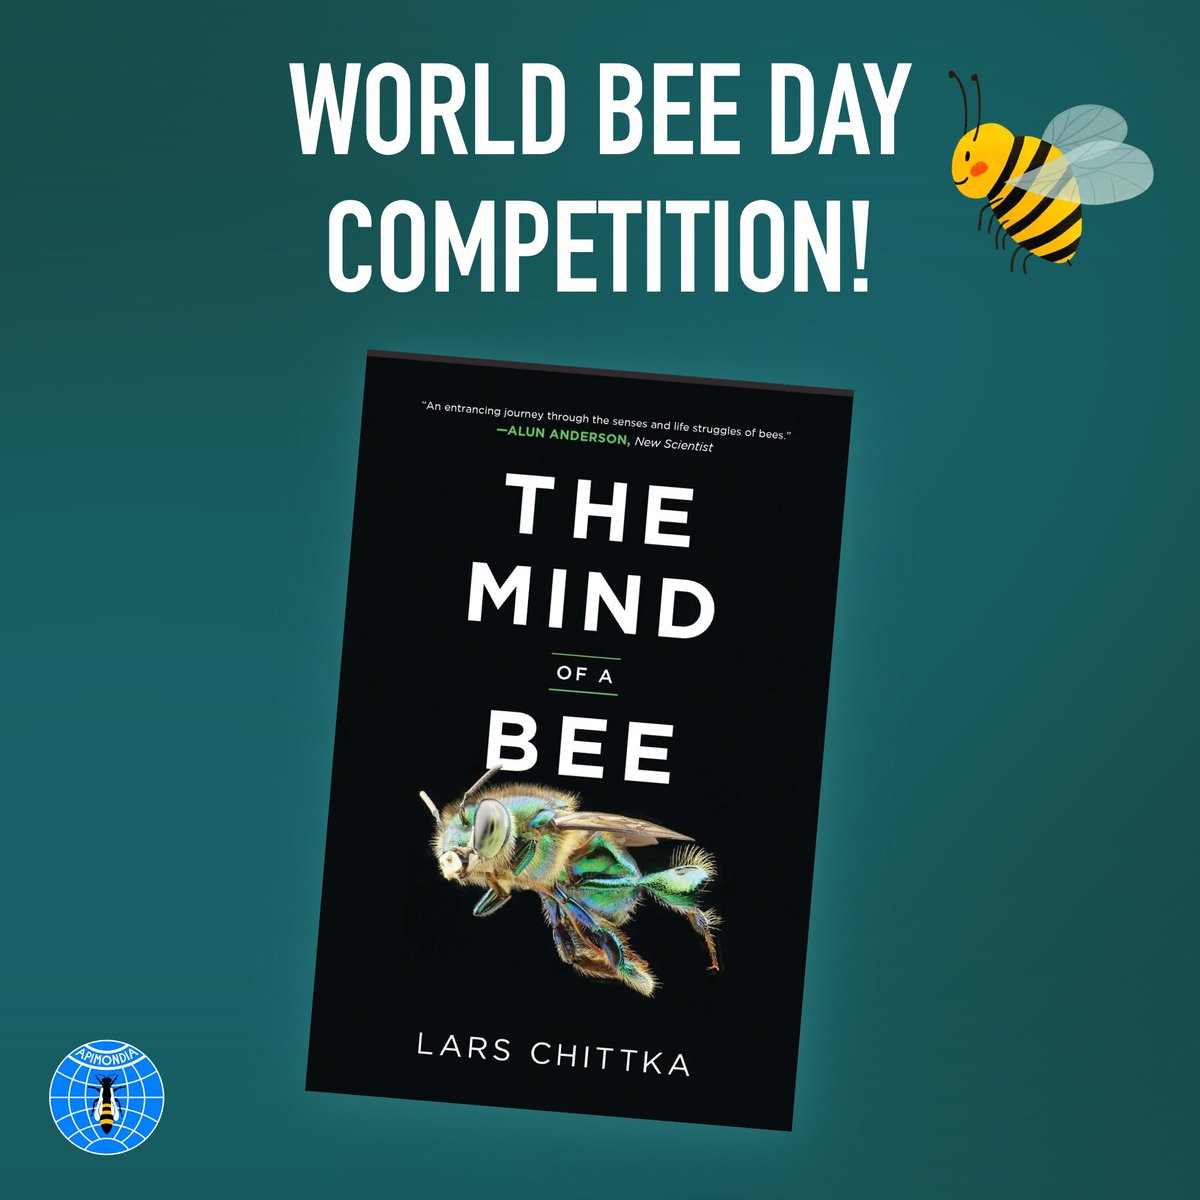 Kindly Repost🙏🏾

🐝#WorldBeeDay competition!

For a chance to win a copy of Lars Chittka's book The Mind of a Bee!       

🐝 Follow @Apimondia and @LChittka 
🐝 Like this post
🐝Tag a friend in the comments below

* UK/EU address only 
* Closes midnight 19 May 2024